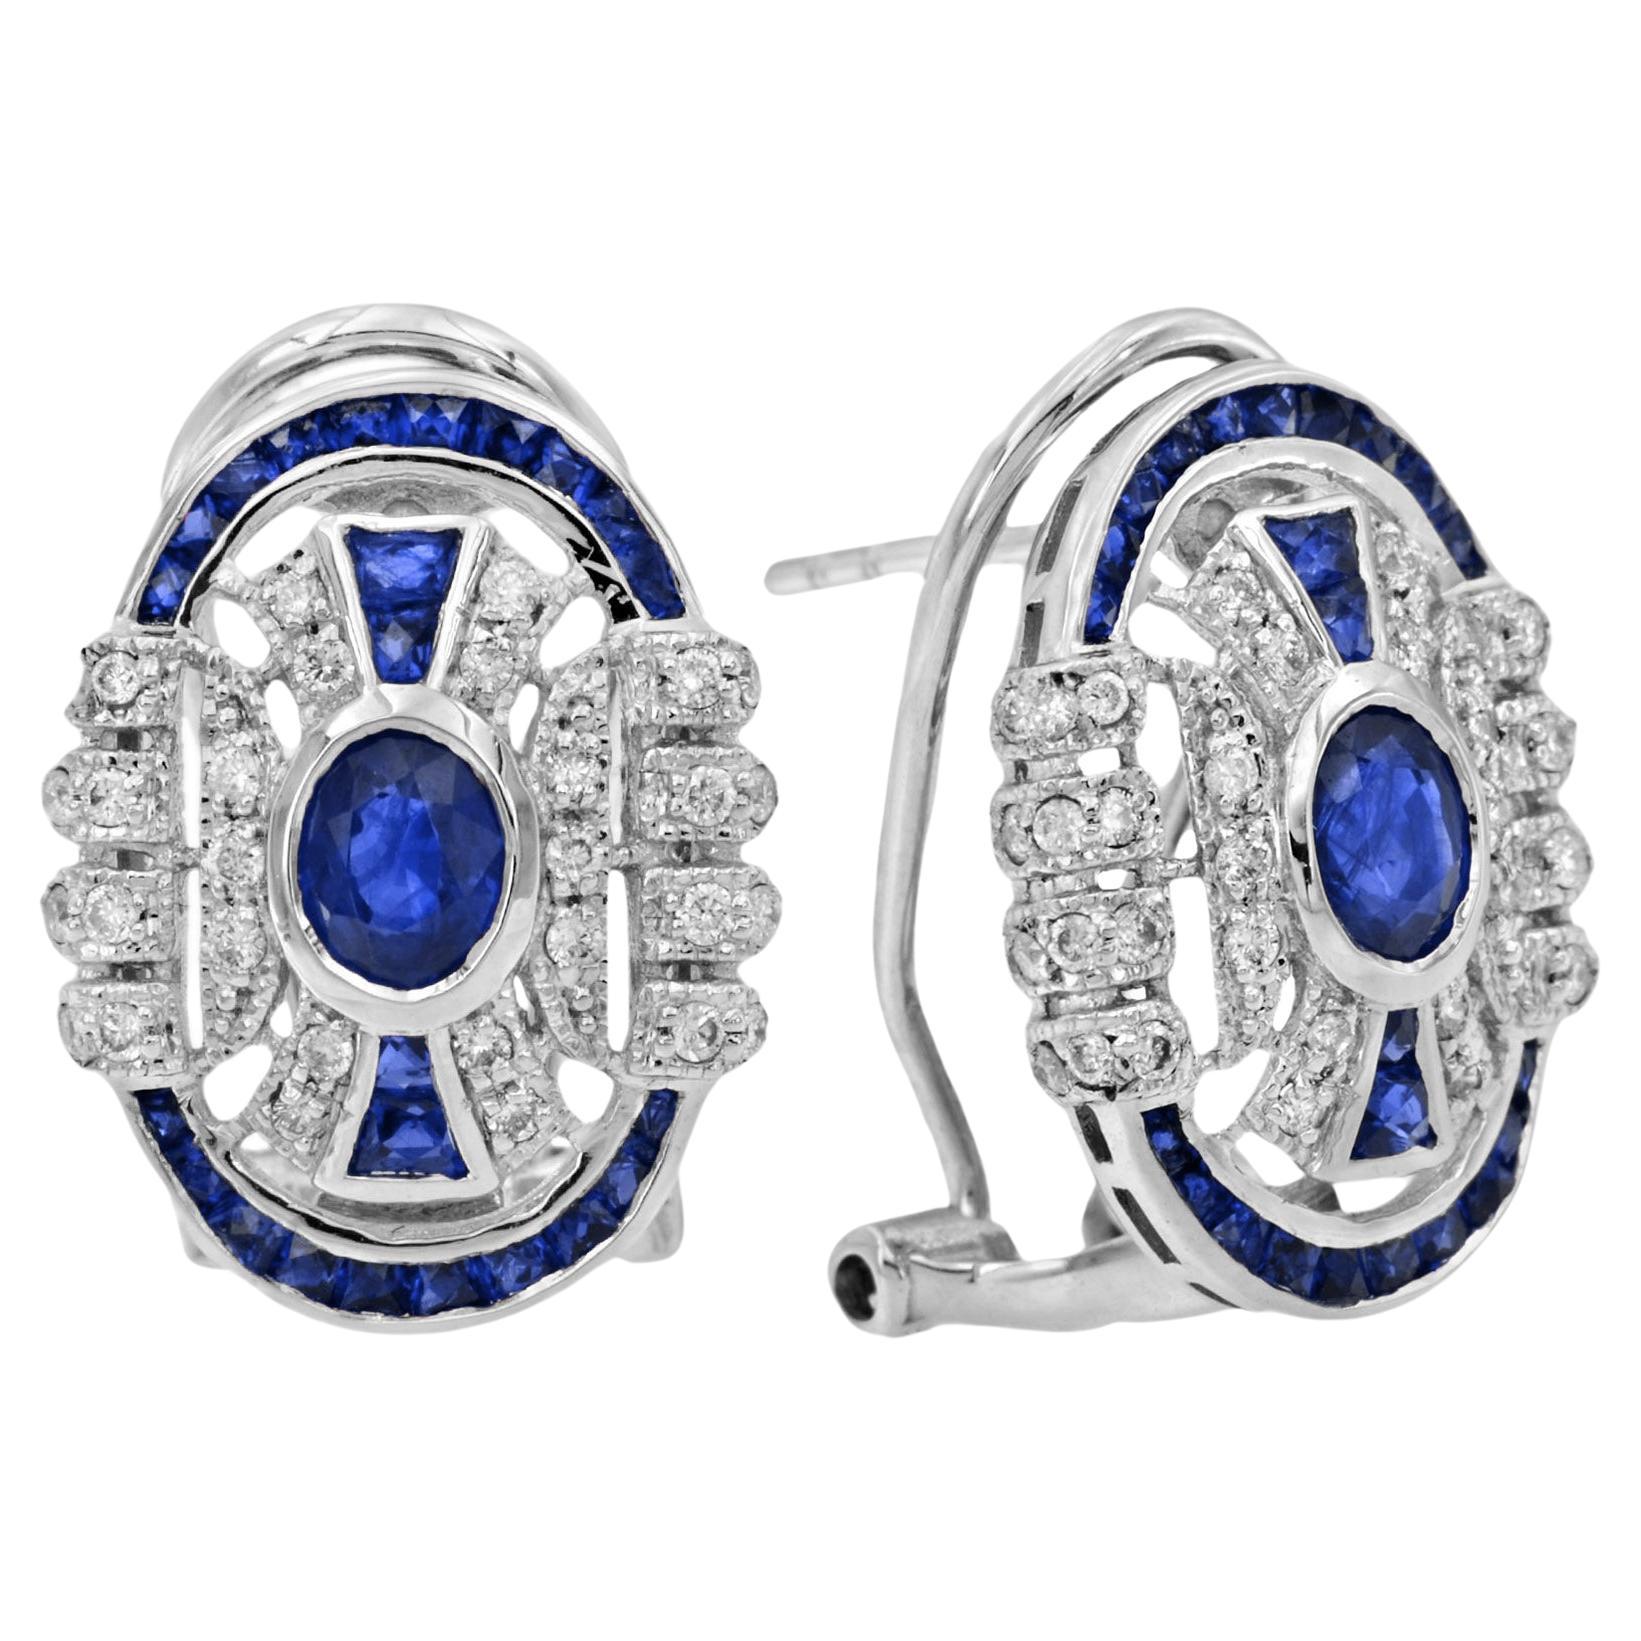 Blue Sapphire and Diamond Art Deco Style Omega Earrings in 18K White Gold For Sale